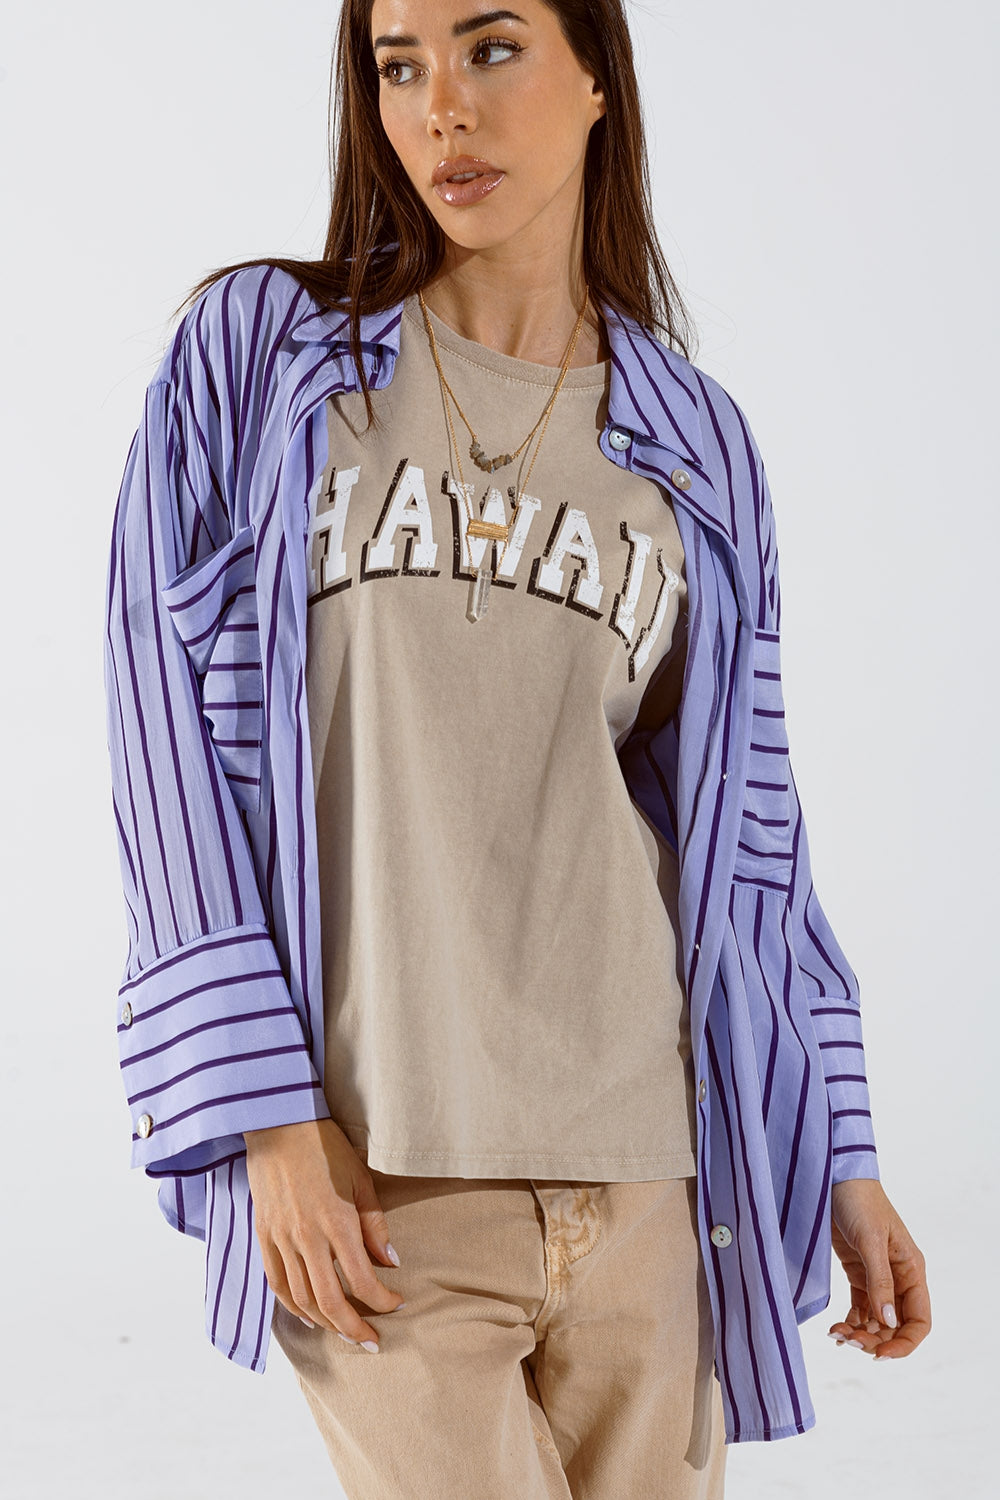 Q2 Lavander shirt with purple stripes and chest pockets